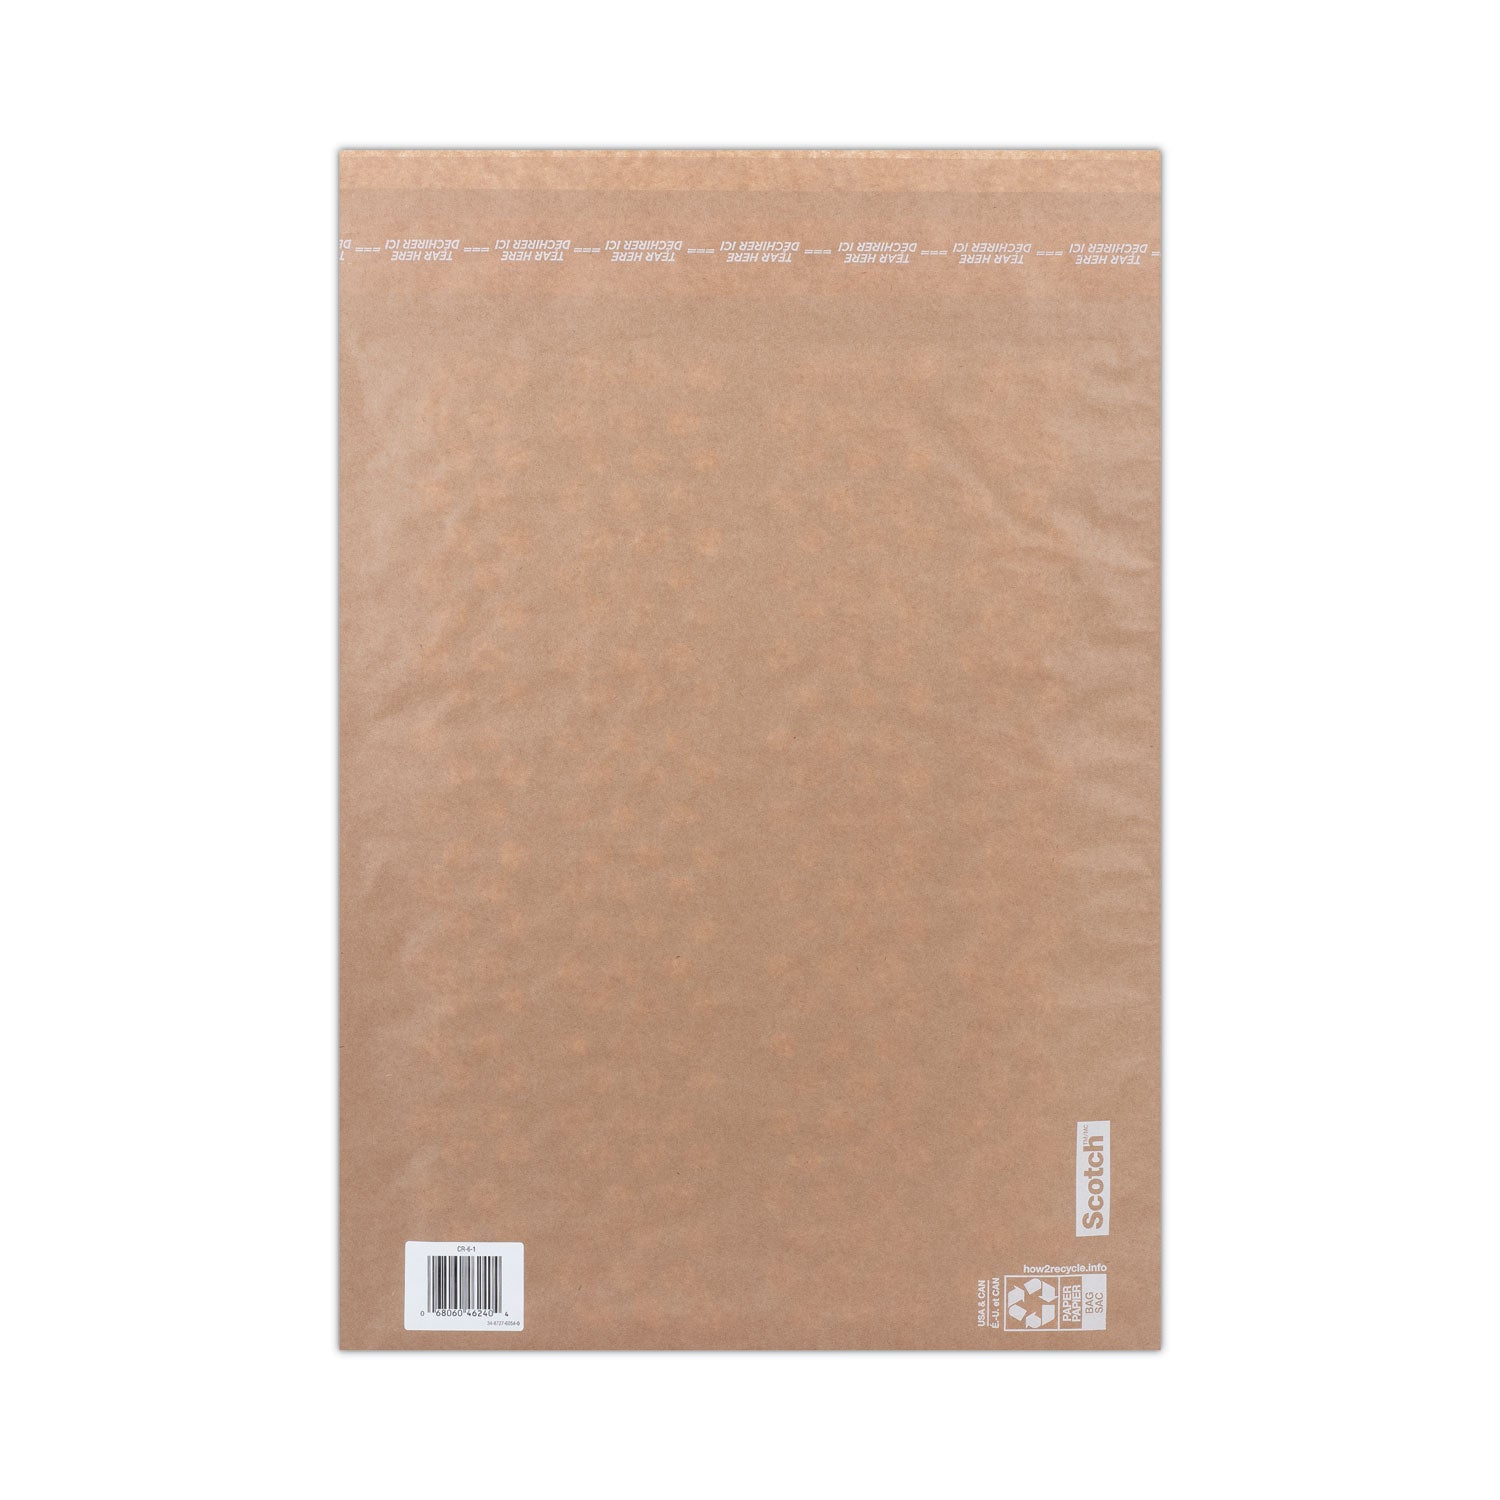 curbside-recyclable-padded-mailer-#6-bubble-cushion-self-adhesive-closure-1375-x-20-natural-kraft-50-carton_mmmcr61 - 2